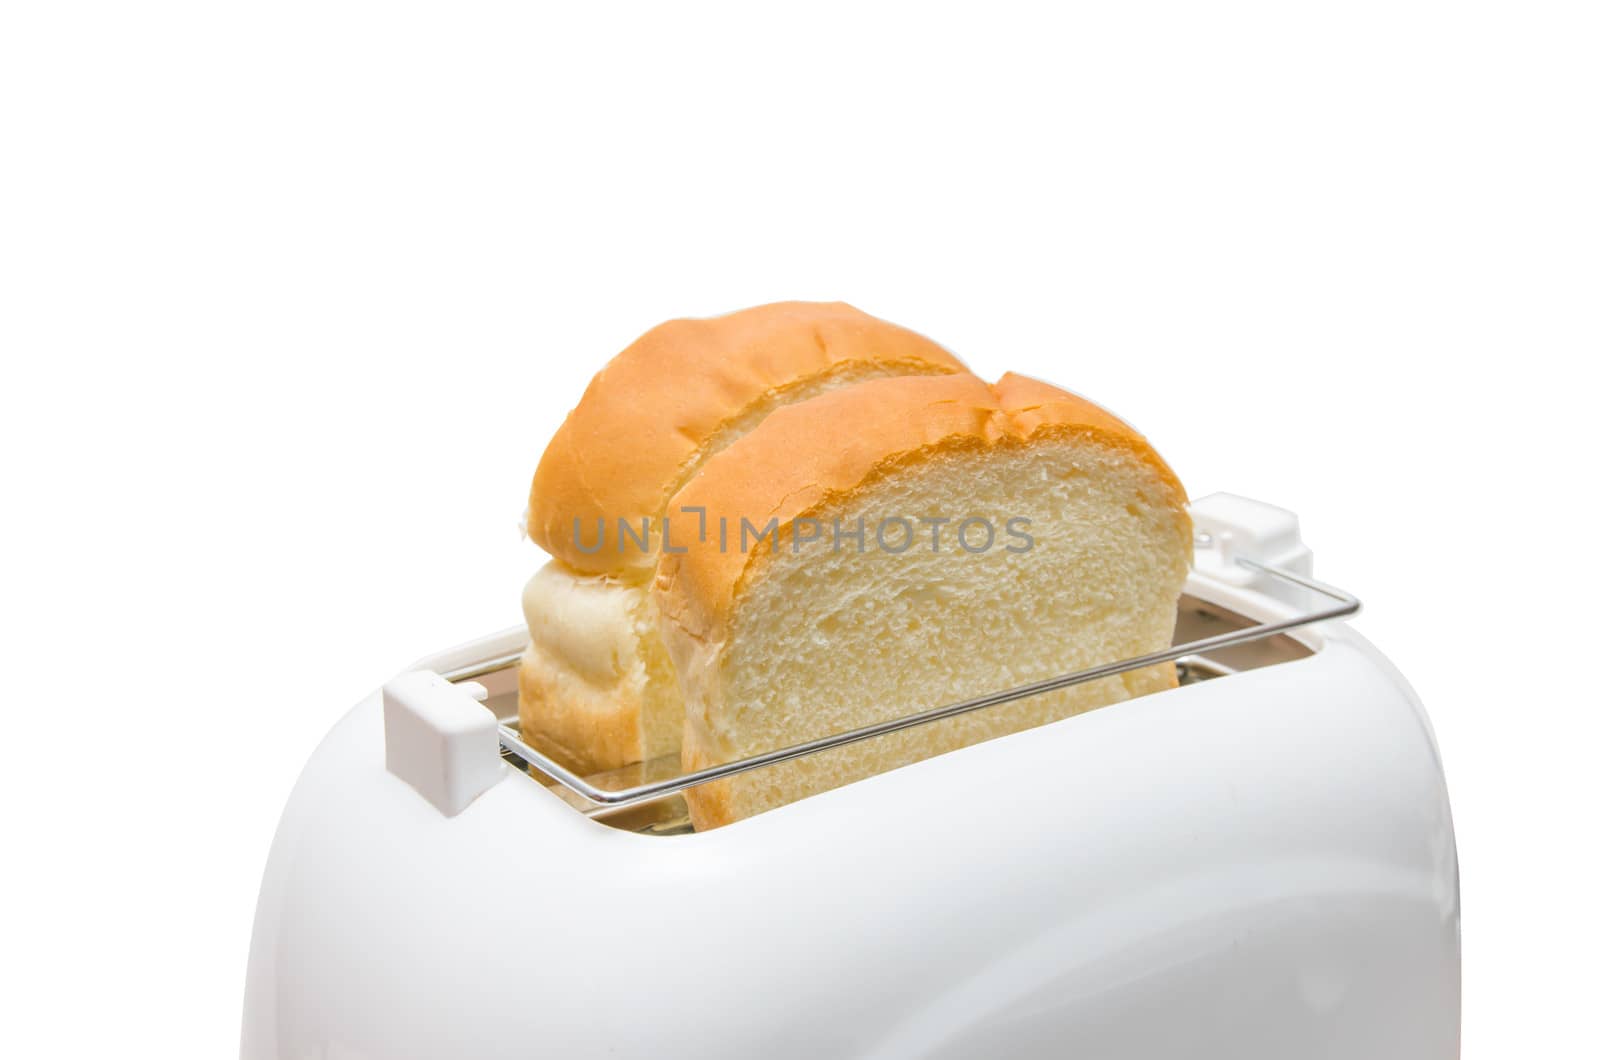 Isolated Bread and Toaster